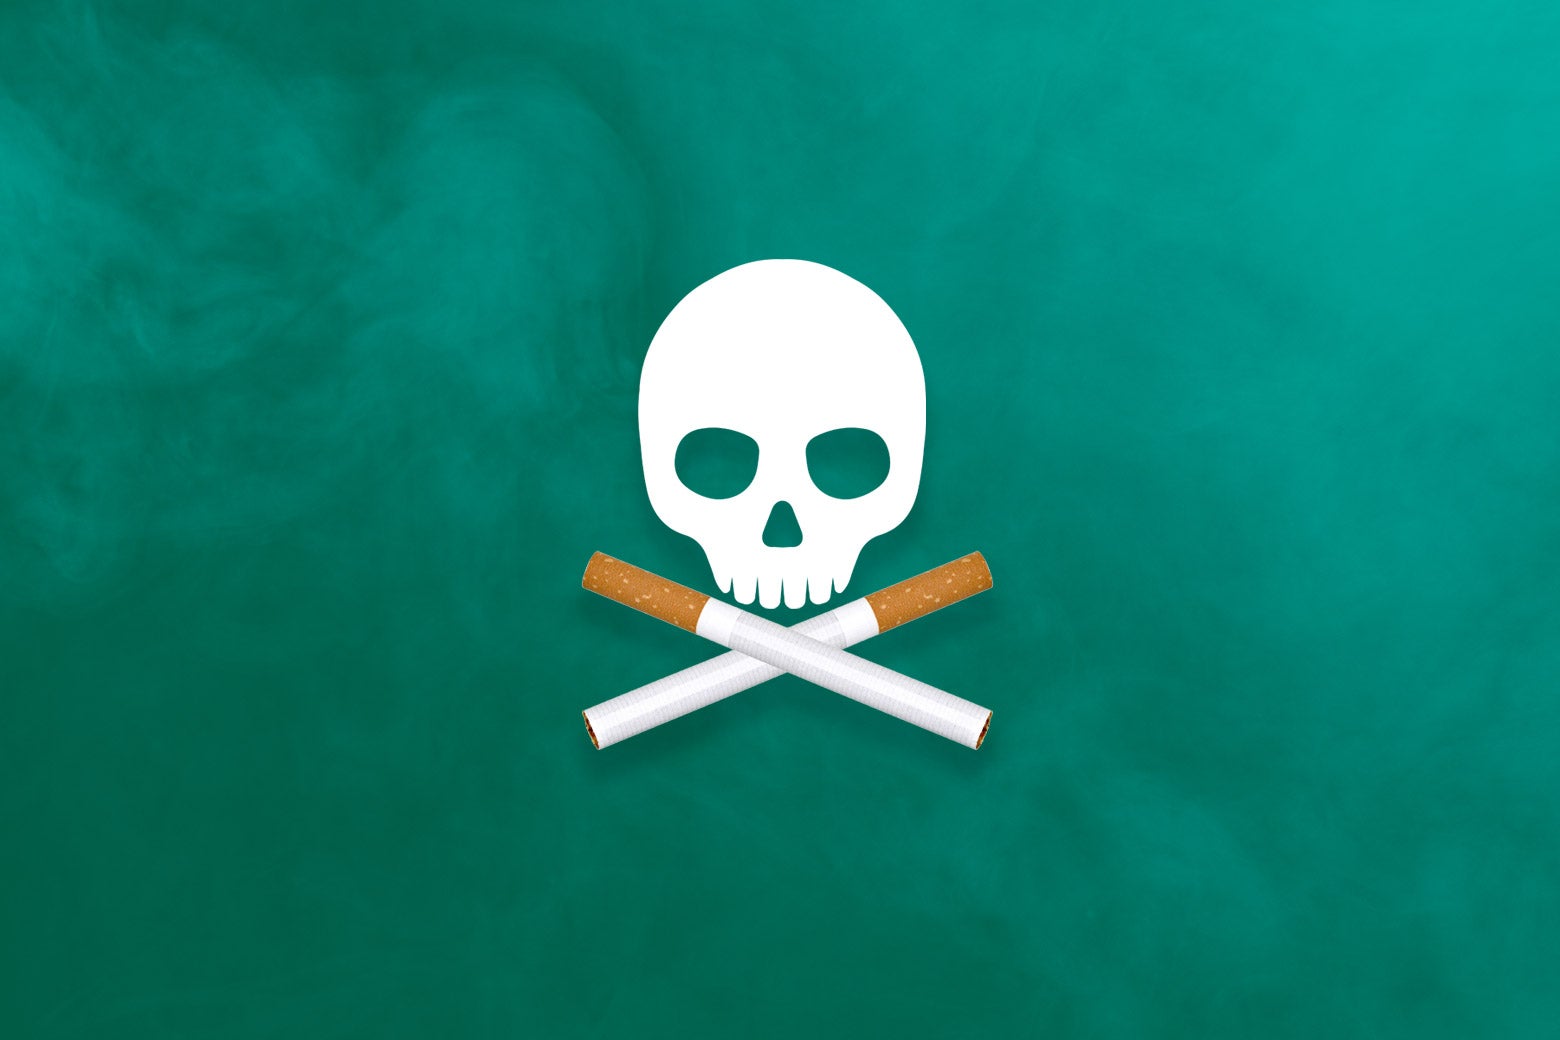 A skull and crossbones, with two cigarettes for the crossbones, against a green smoke-filled background.